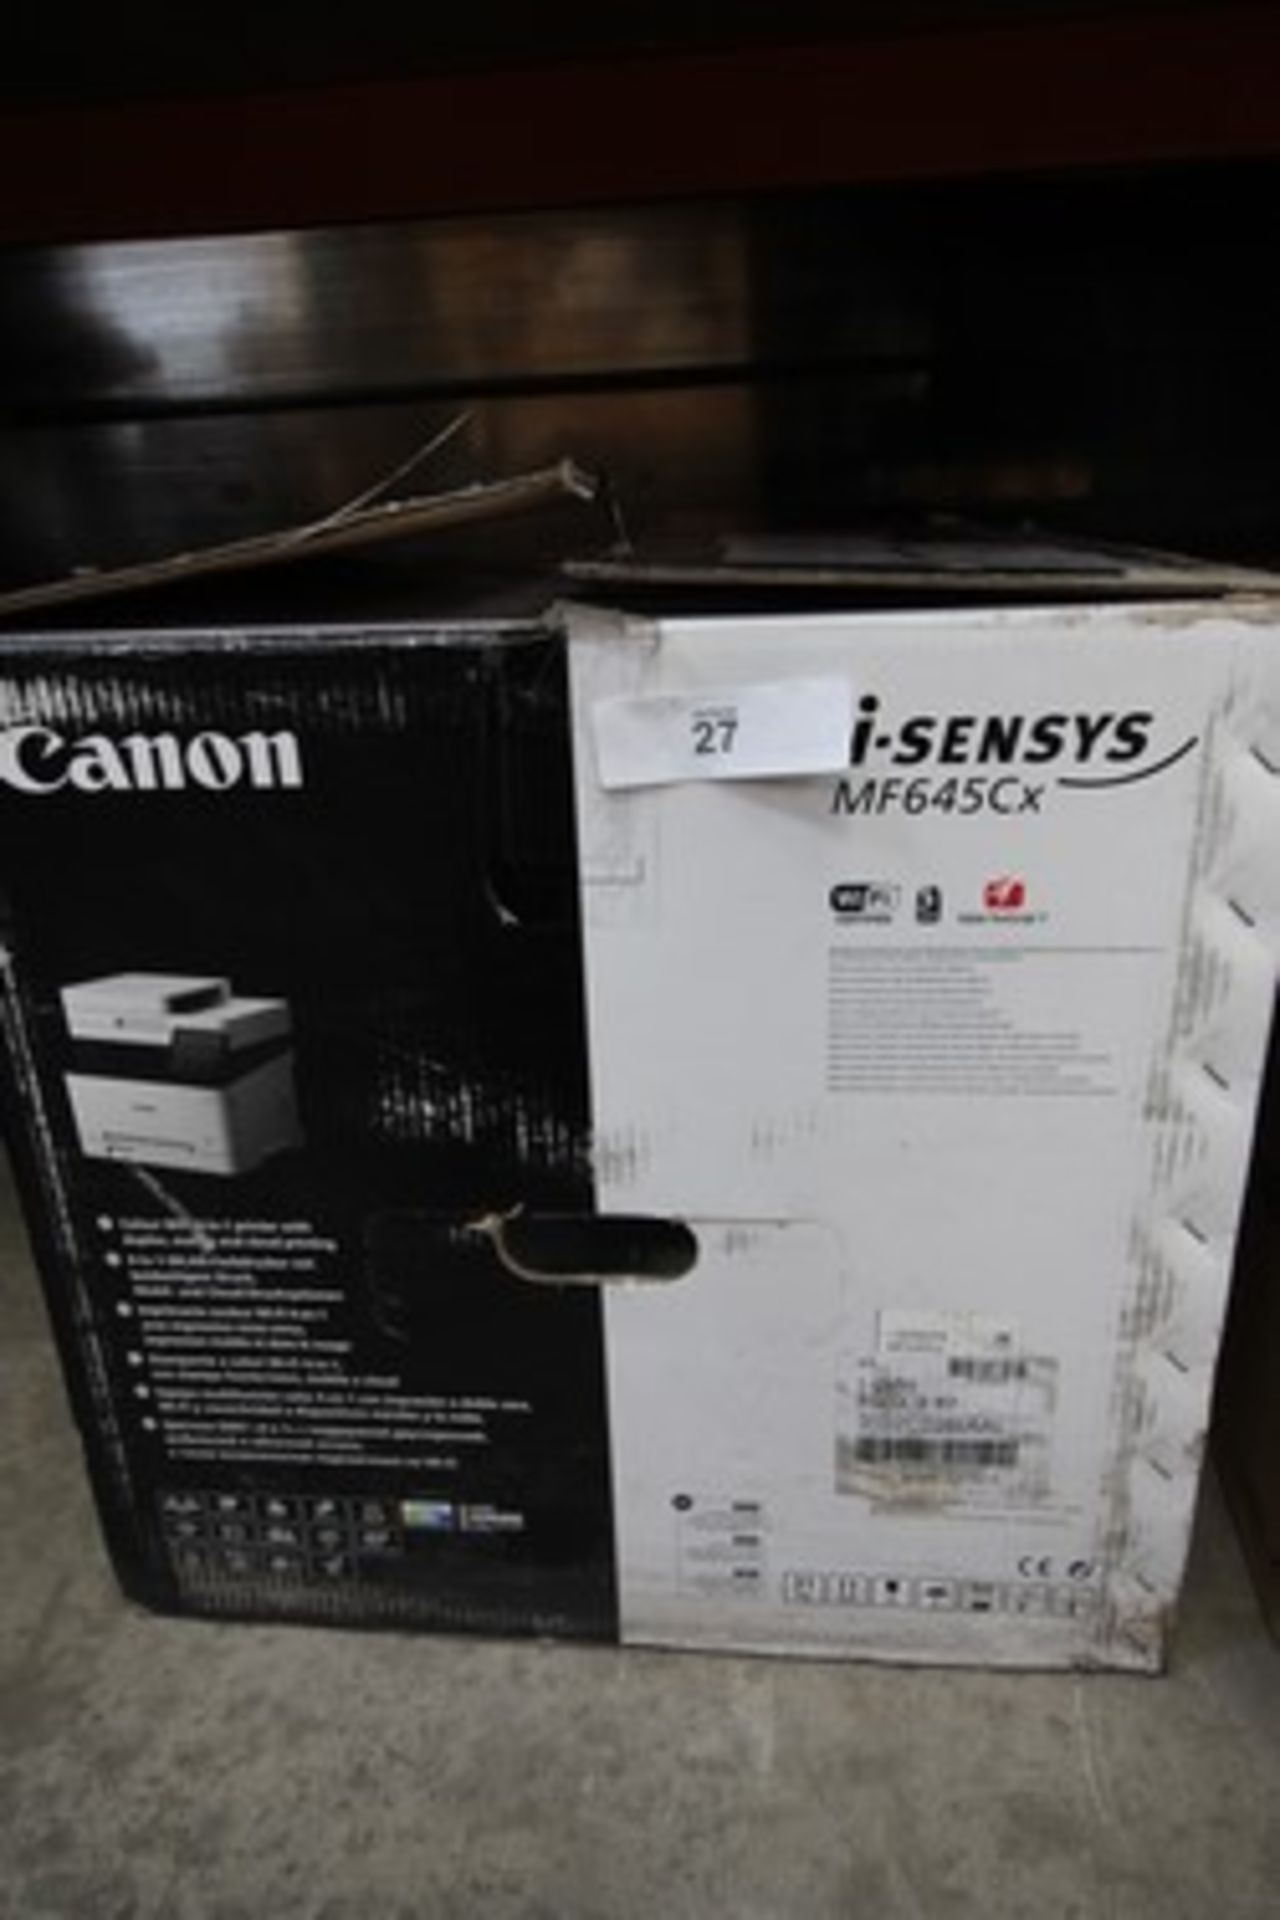 1 x Cannon I.Sensys all in one MF645CX laser printer, ref. No. 3102C026AA, dusty from storage - - Image 3 of 3